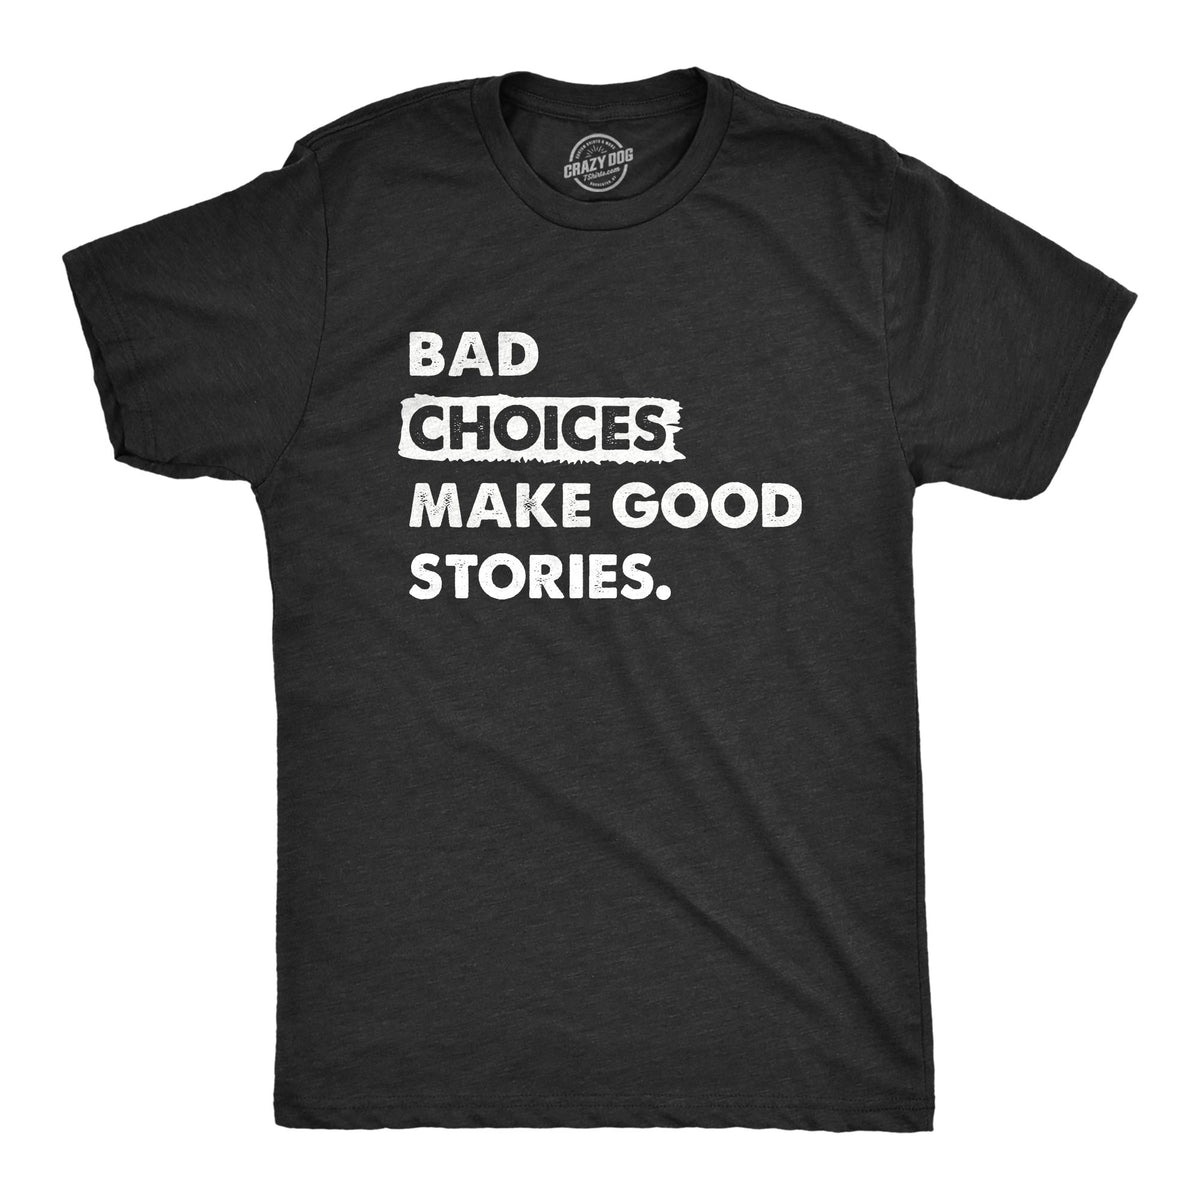 Funny Heather Black - BADCHOICES Bad Choices Make Good Stories Mens T Shirt Nerdy Sarcastic Tee